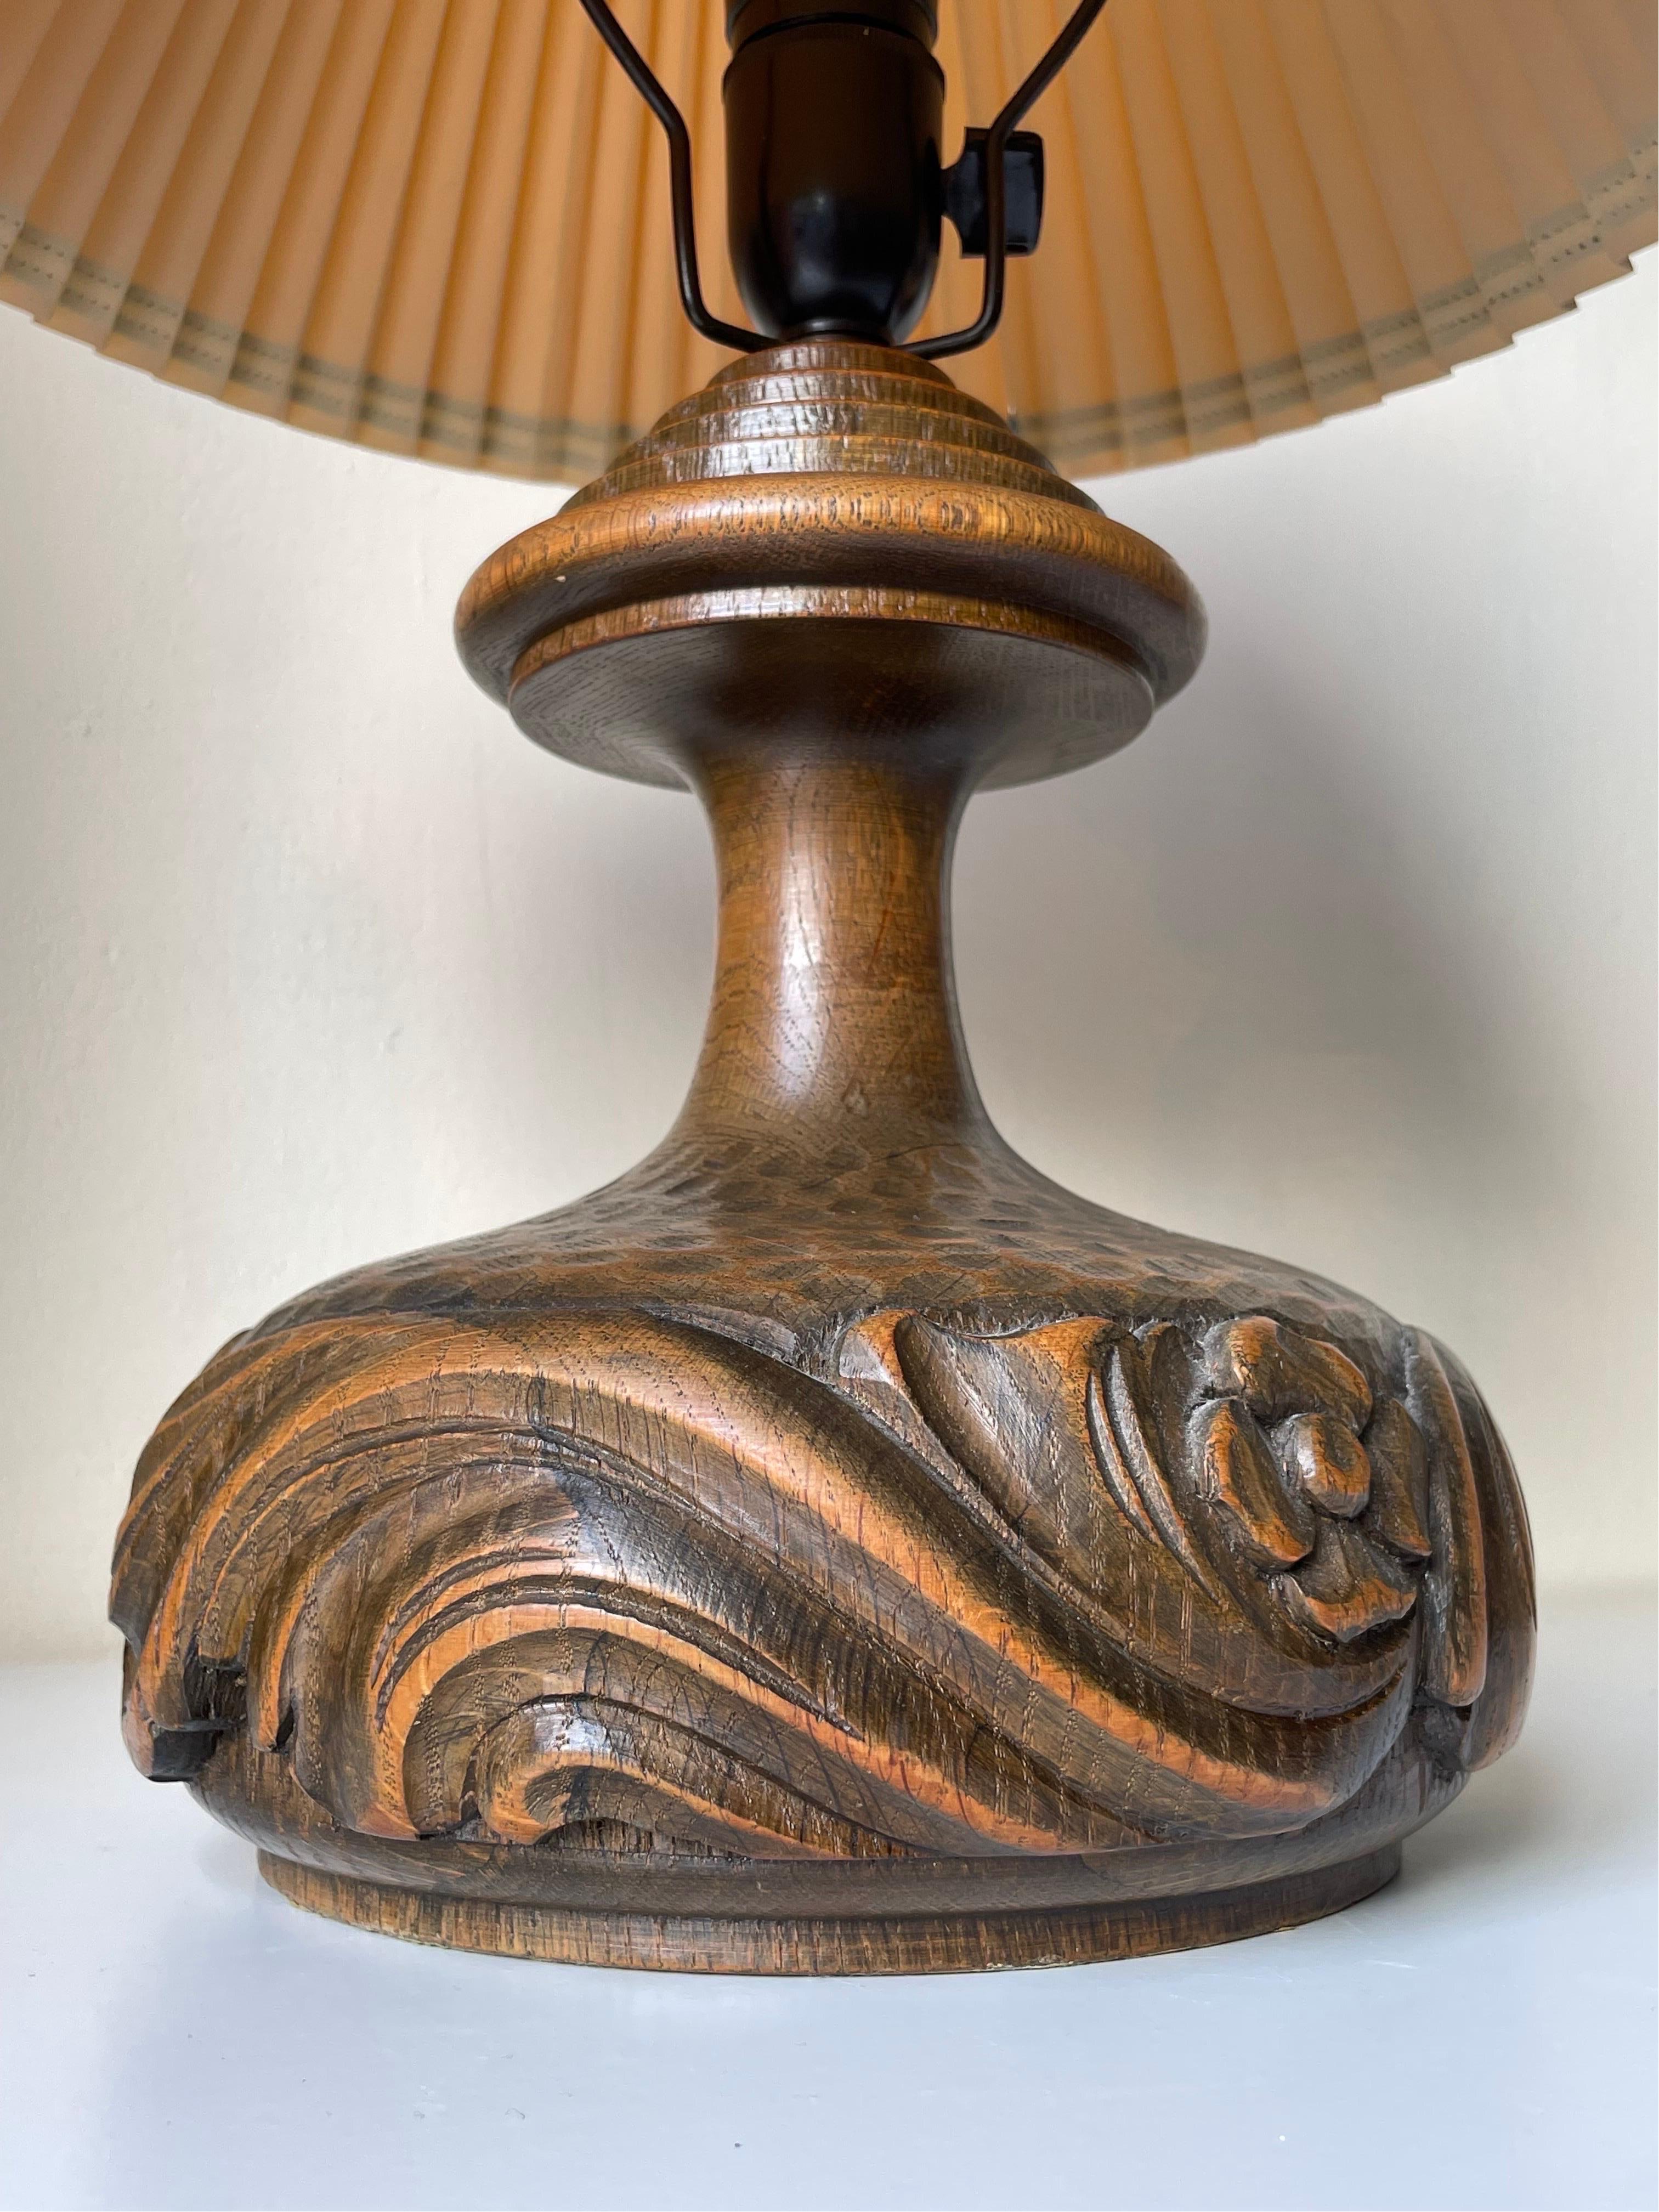 1940s lacquered solid wooden table lamp with swirling organic hand-carved relief decorations around the heavy body. Smooth slender neck with wide tiered architectural top. Original black fitting with switch and brass shade holder. Beautiful vintage